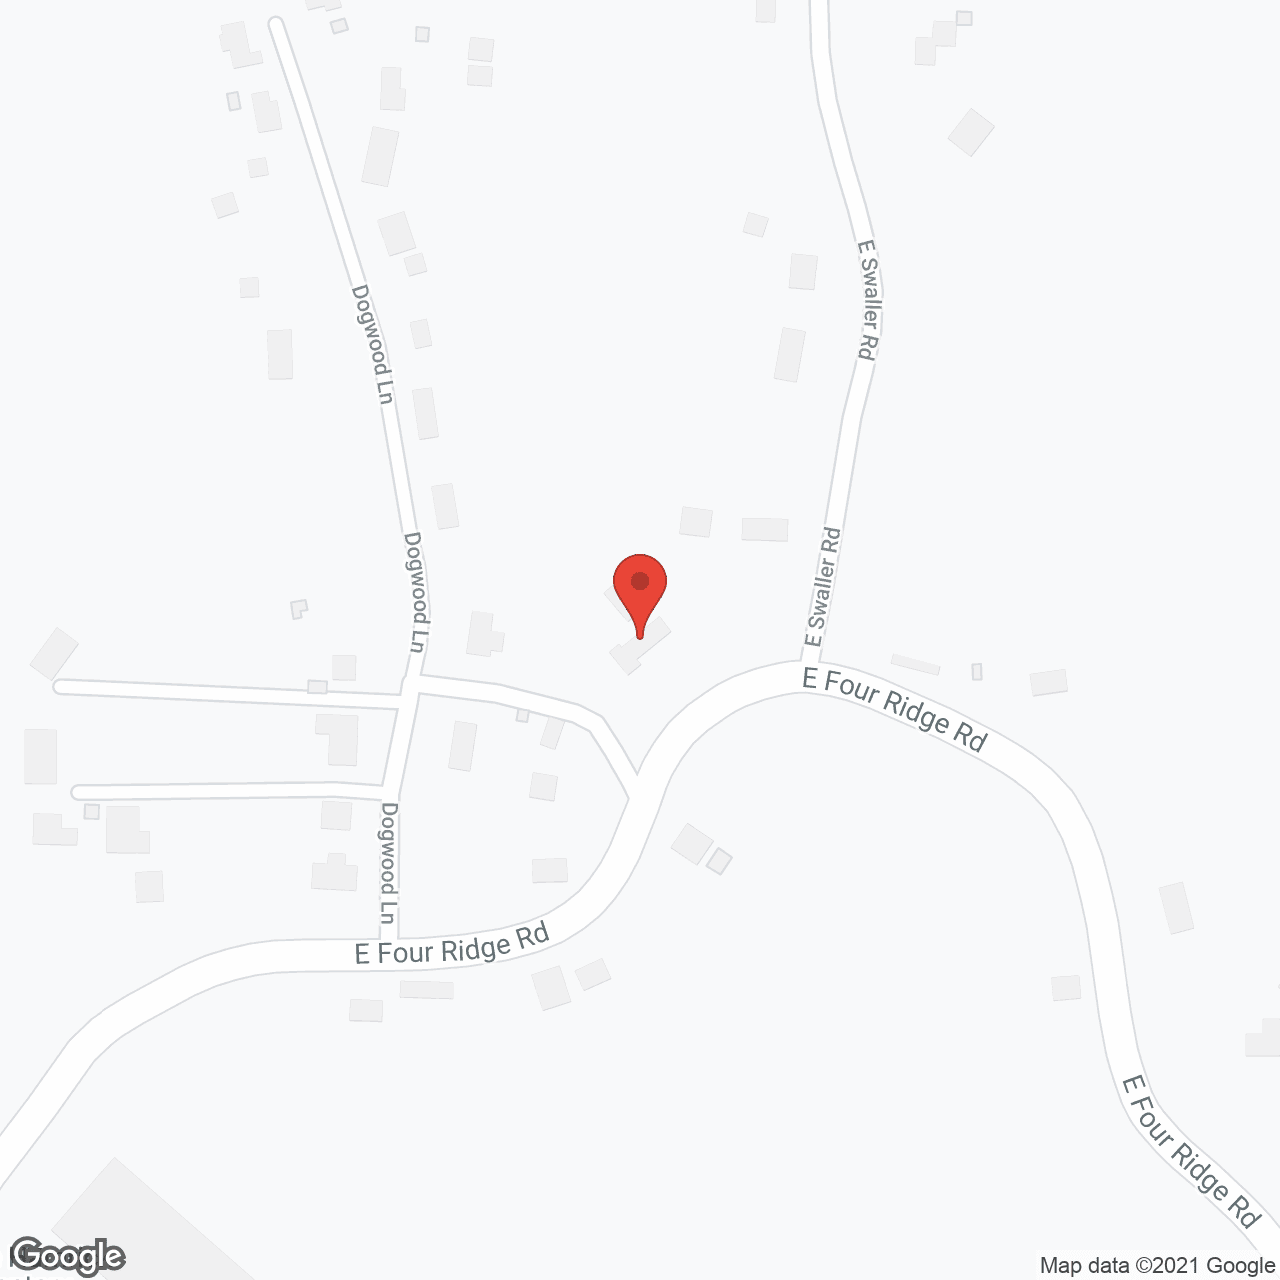 Aloha Residential Care Home in google map